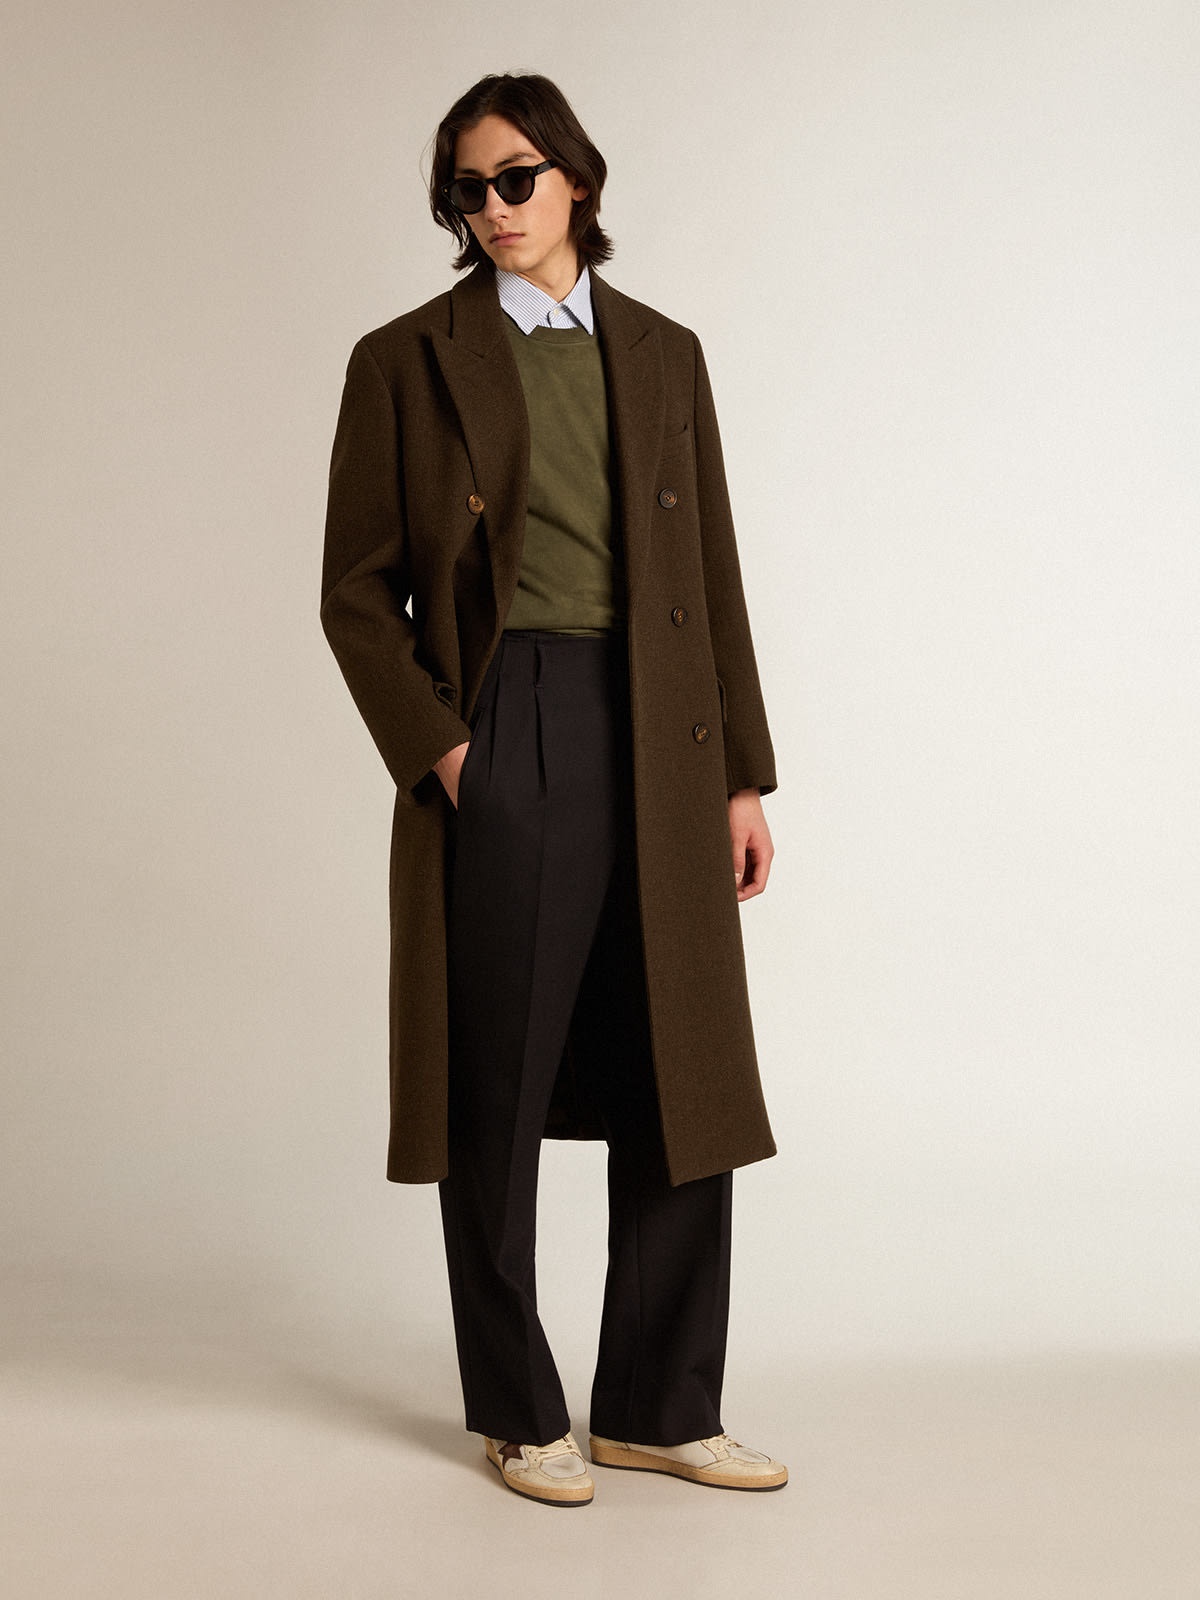 Men’s double-breasted coat in bark-colored wool - 3